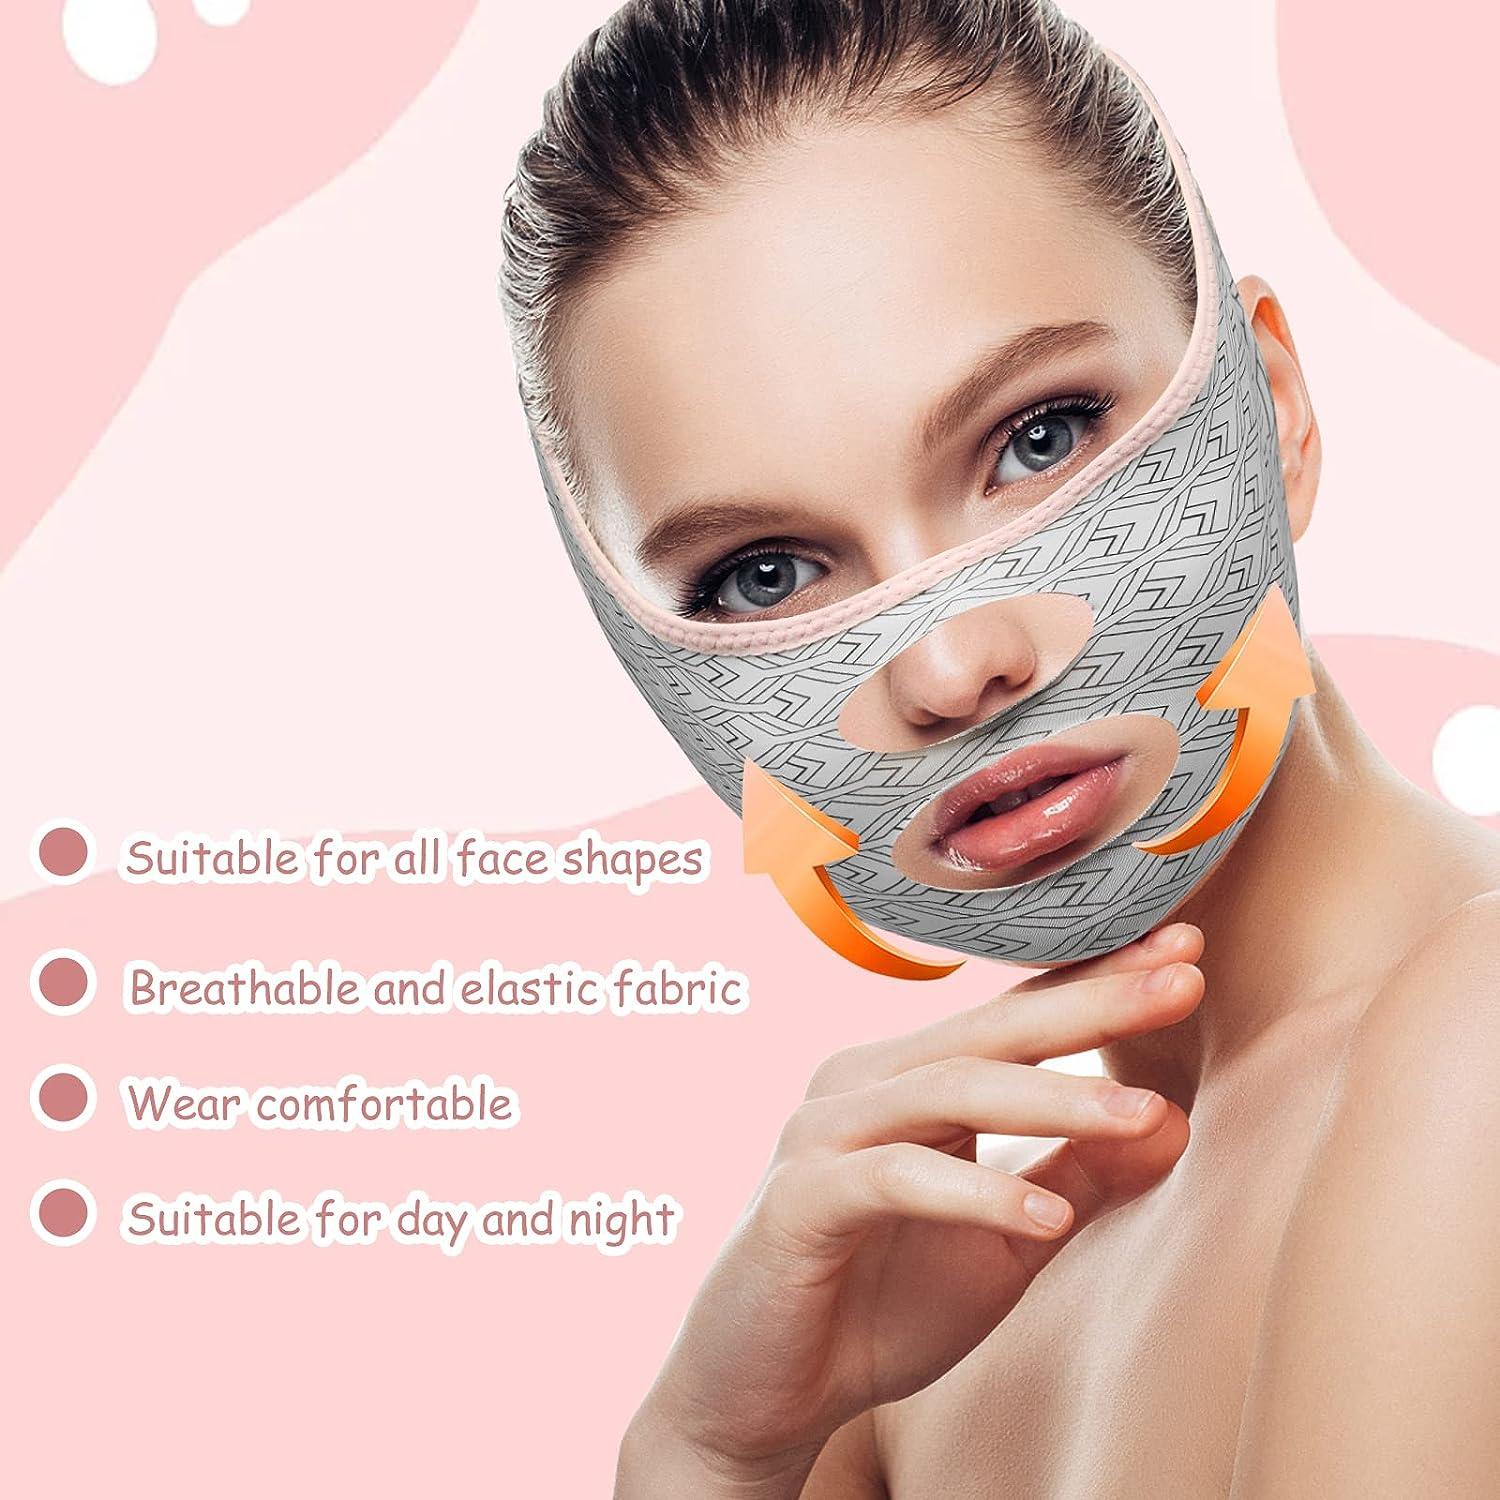 Beauty Face Sculpting Sleep Mask V Line Lifting Mask Double Chin Reducer  Sculptor Face Shaper Reusable Face Lifting Mask Double Chin Mask Lift Face  Slimmer Chin Strap for Double Chin for Women